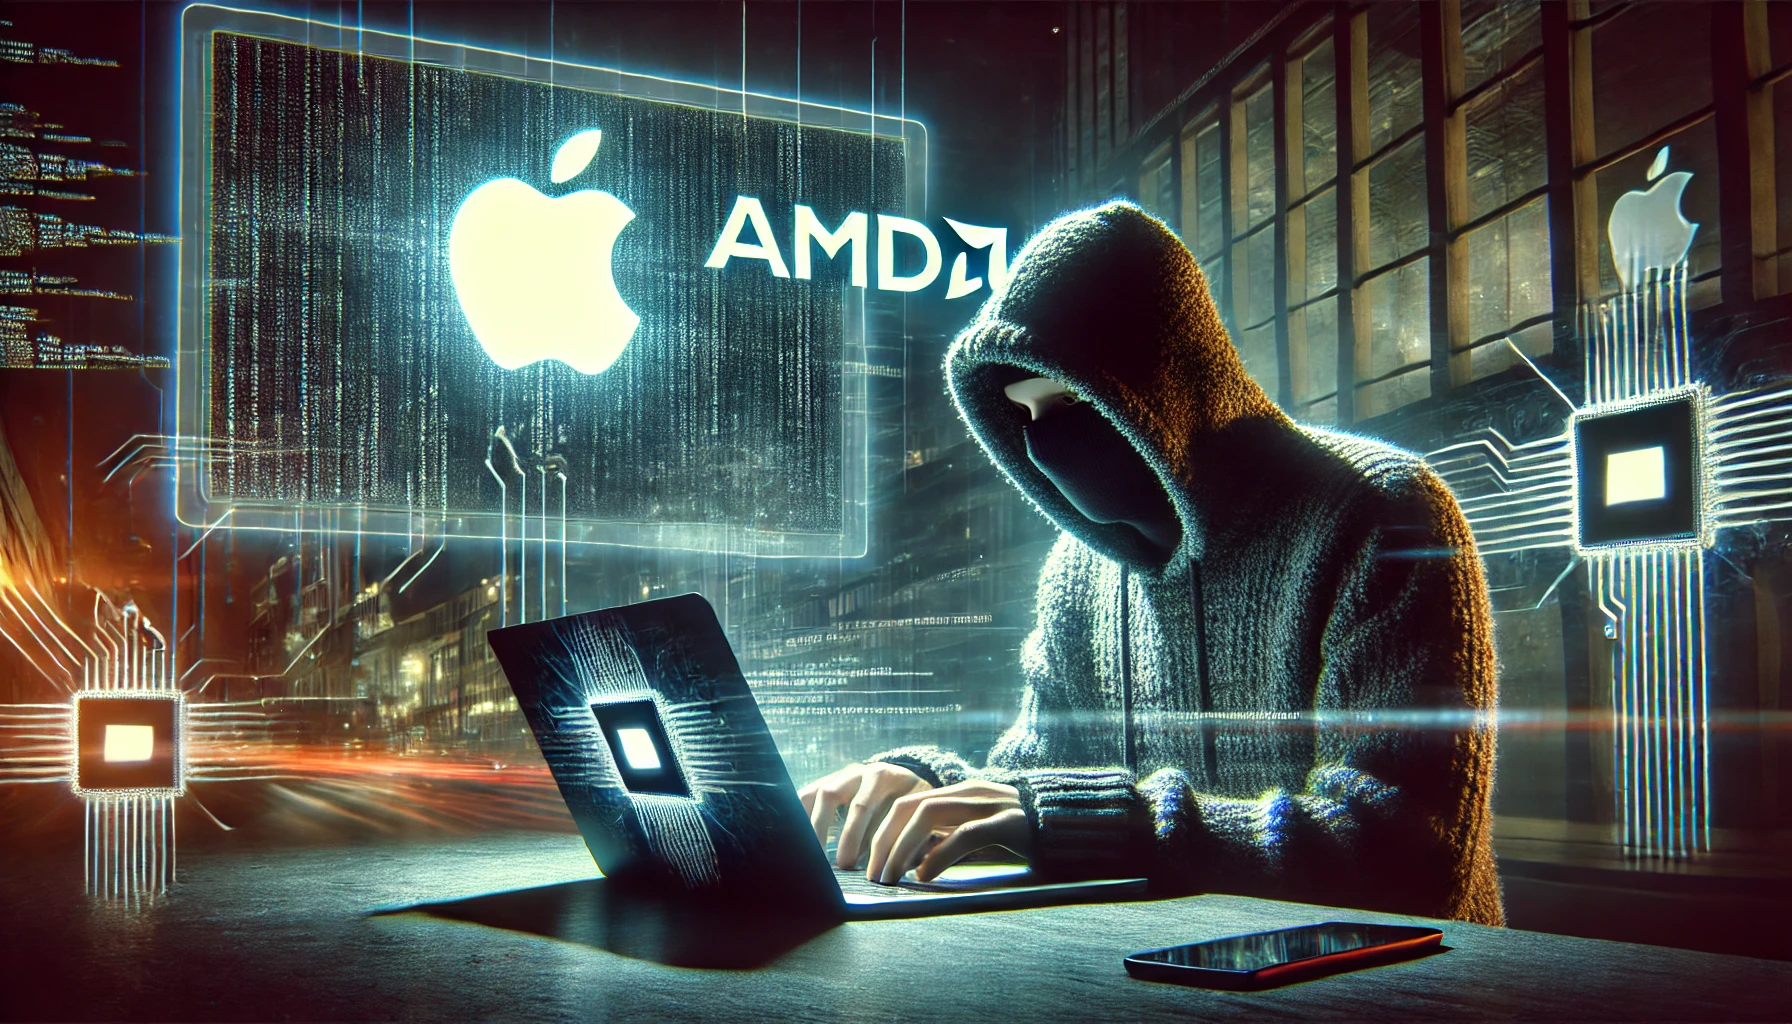 Hacker Claims Breach of Apple Systems Following Recent AMD Cyberattack